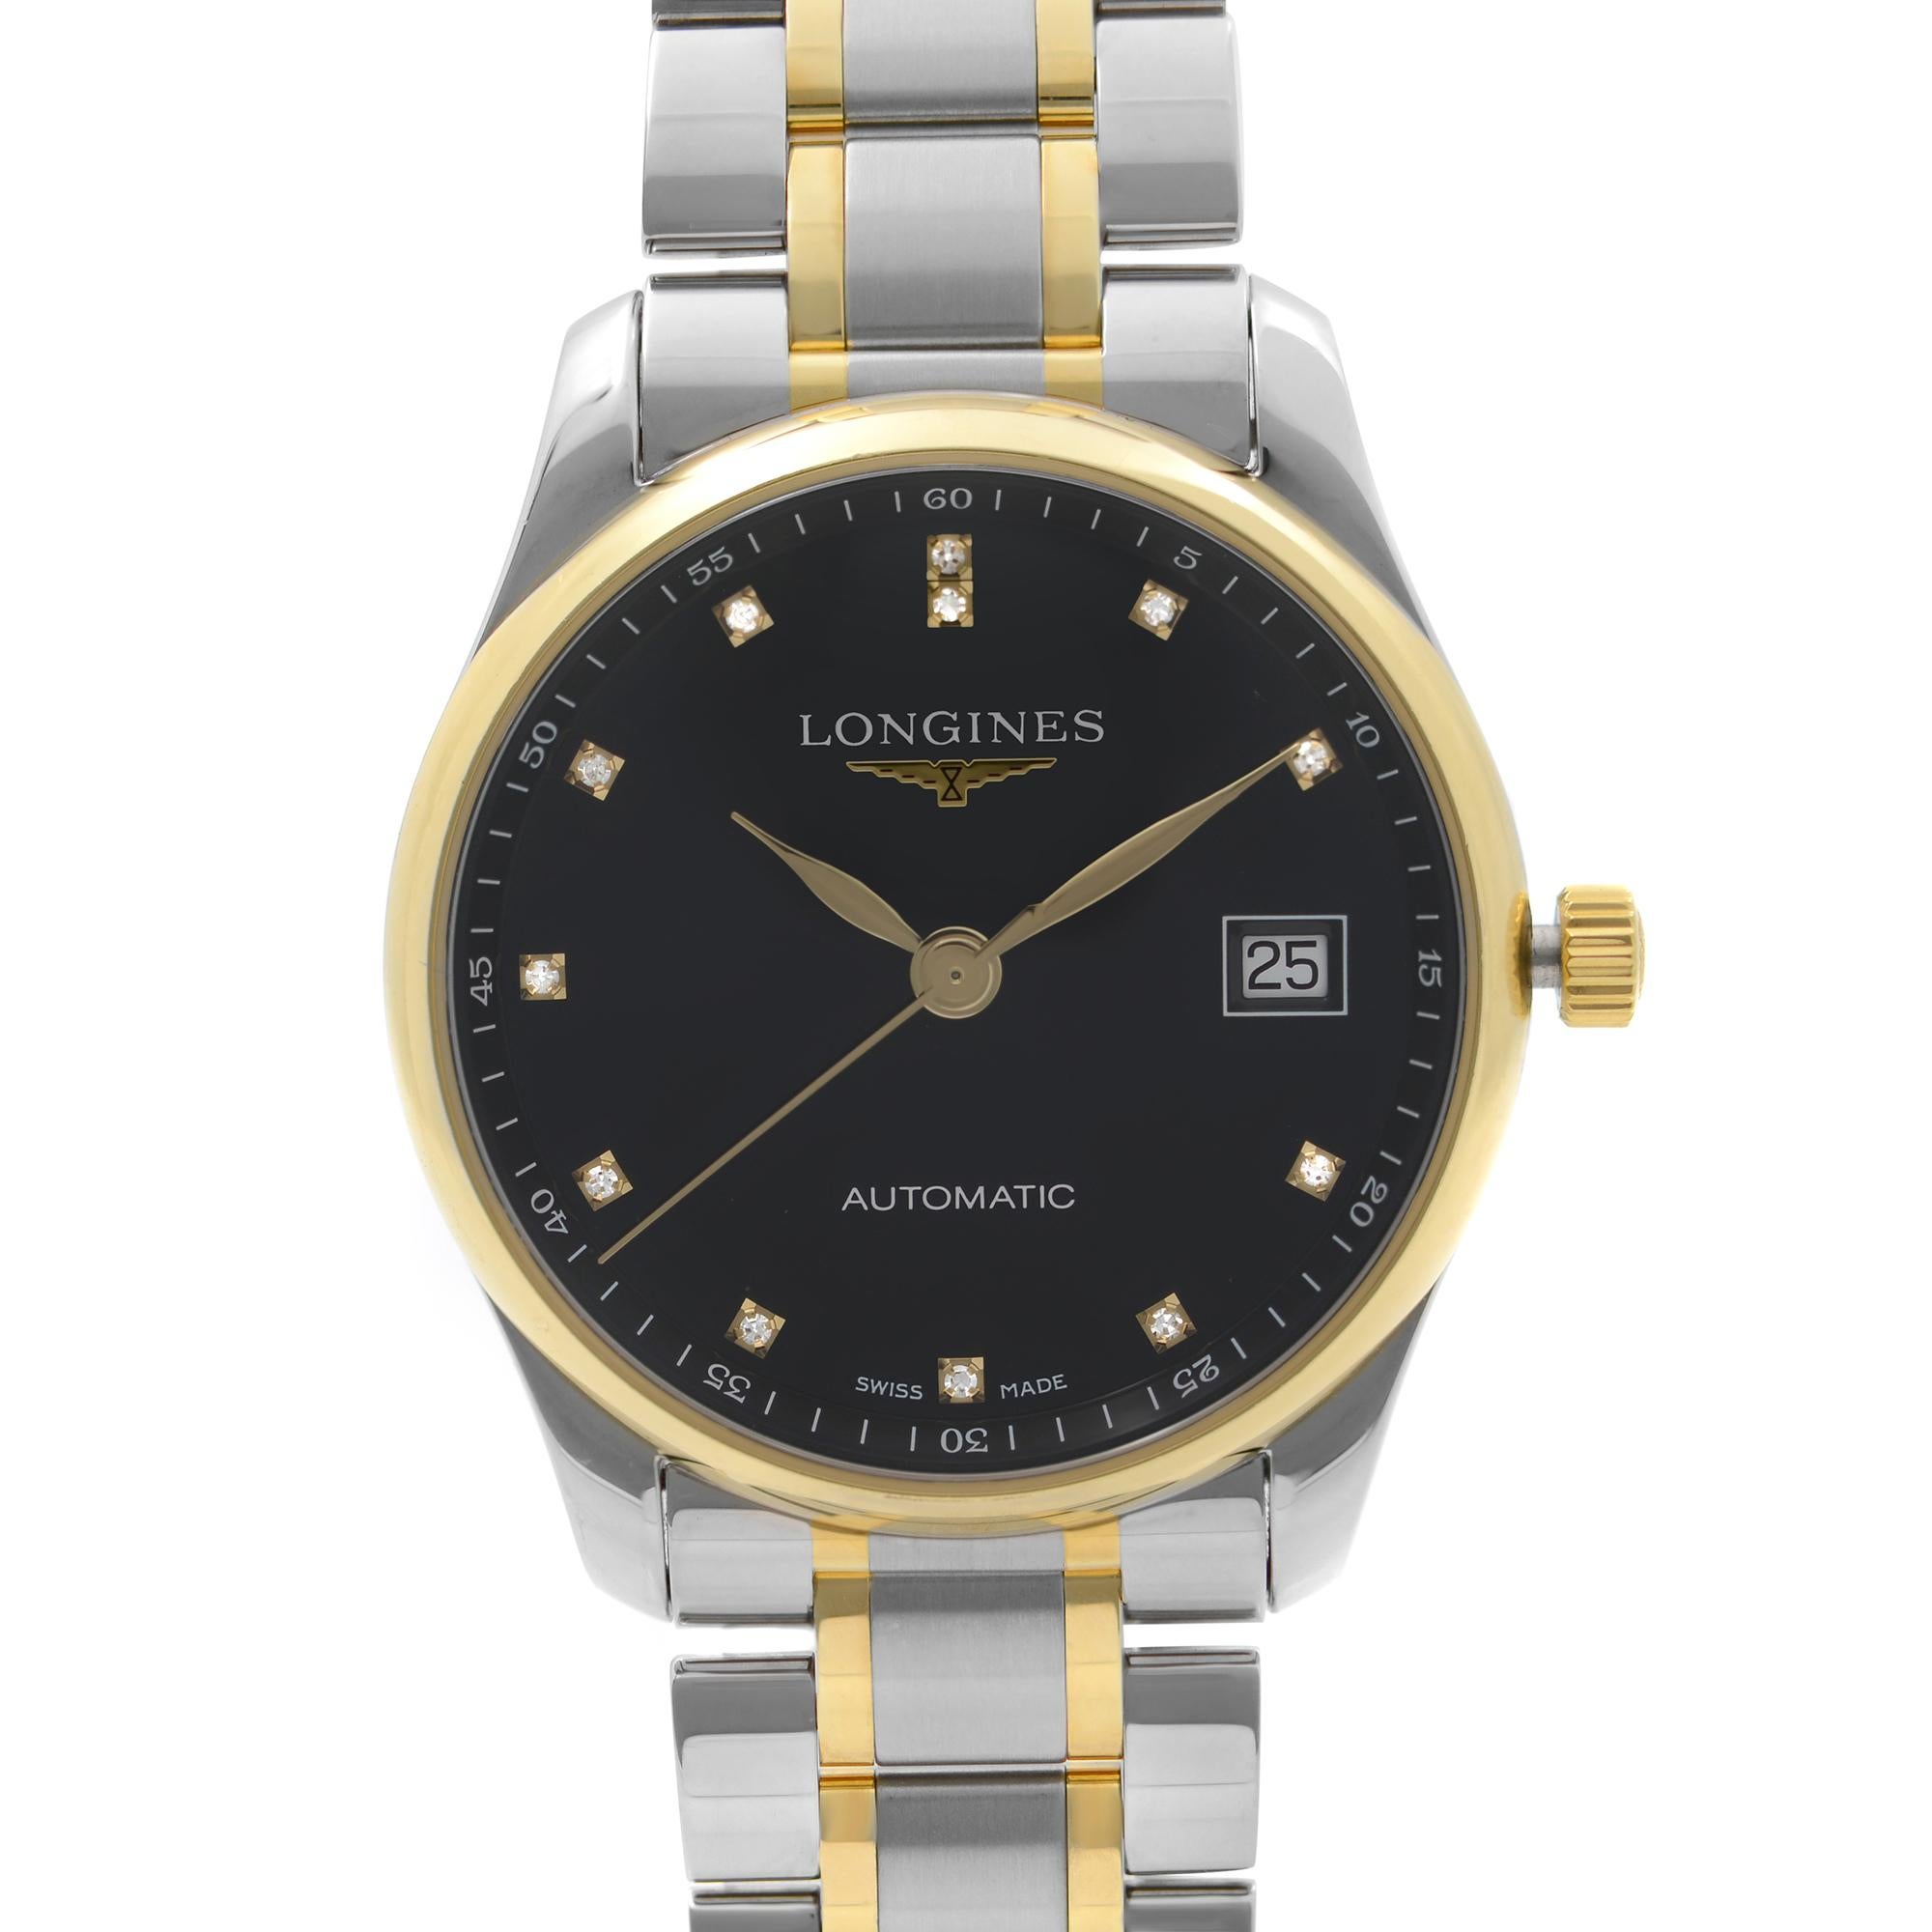 Display Longines Master Collection 18k Black Diamond Dial Men's Automatic Watch L23854876. Can have minor blemishes on gold tone parts during store display This Beautiful Timepiece Features: Solid 18K Gold with Steel Case & Bracelet. Fixed Bezel.